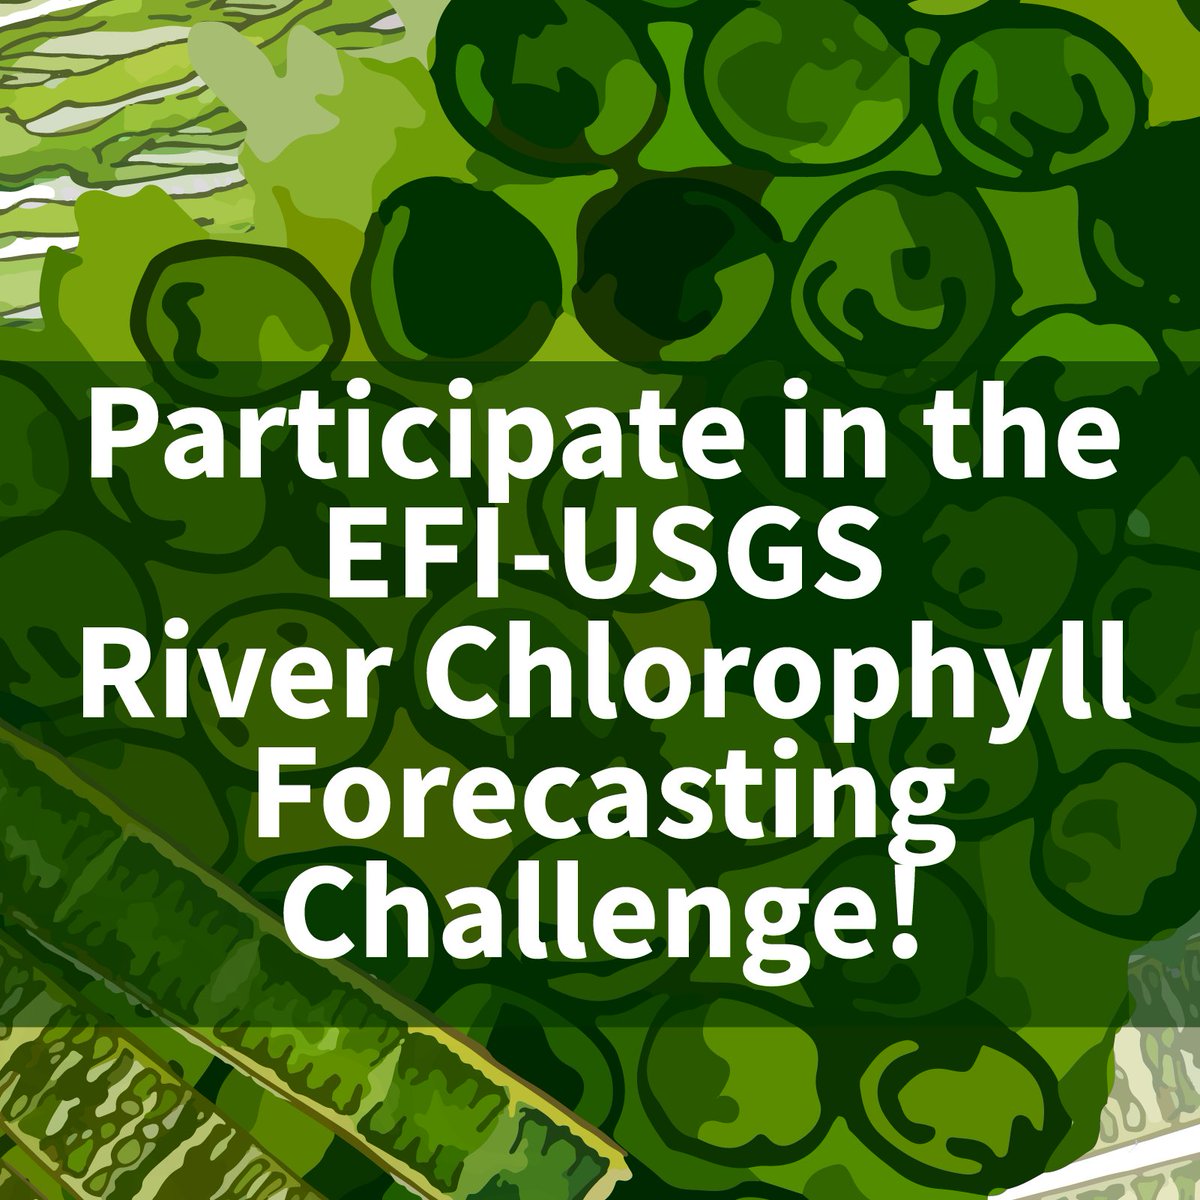 Join the challenge to forecast river chlorophyll with EFI-USGS River Chlorophyll Forecasting Challenge co-hosted by @eco4cast and @USGS_Water! Sharpen your skills & contribute to vital research! #HABs #Forecasting #WDFN #WaterData #OpenScience Read more: waterdata.usgs.gov/blog/habs-fore…